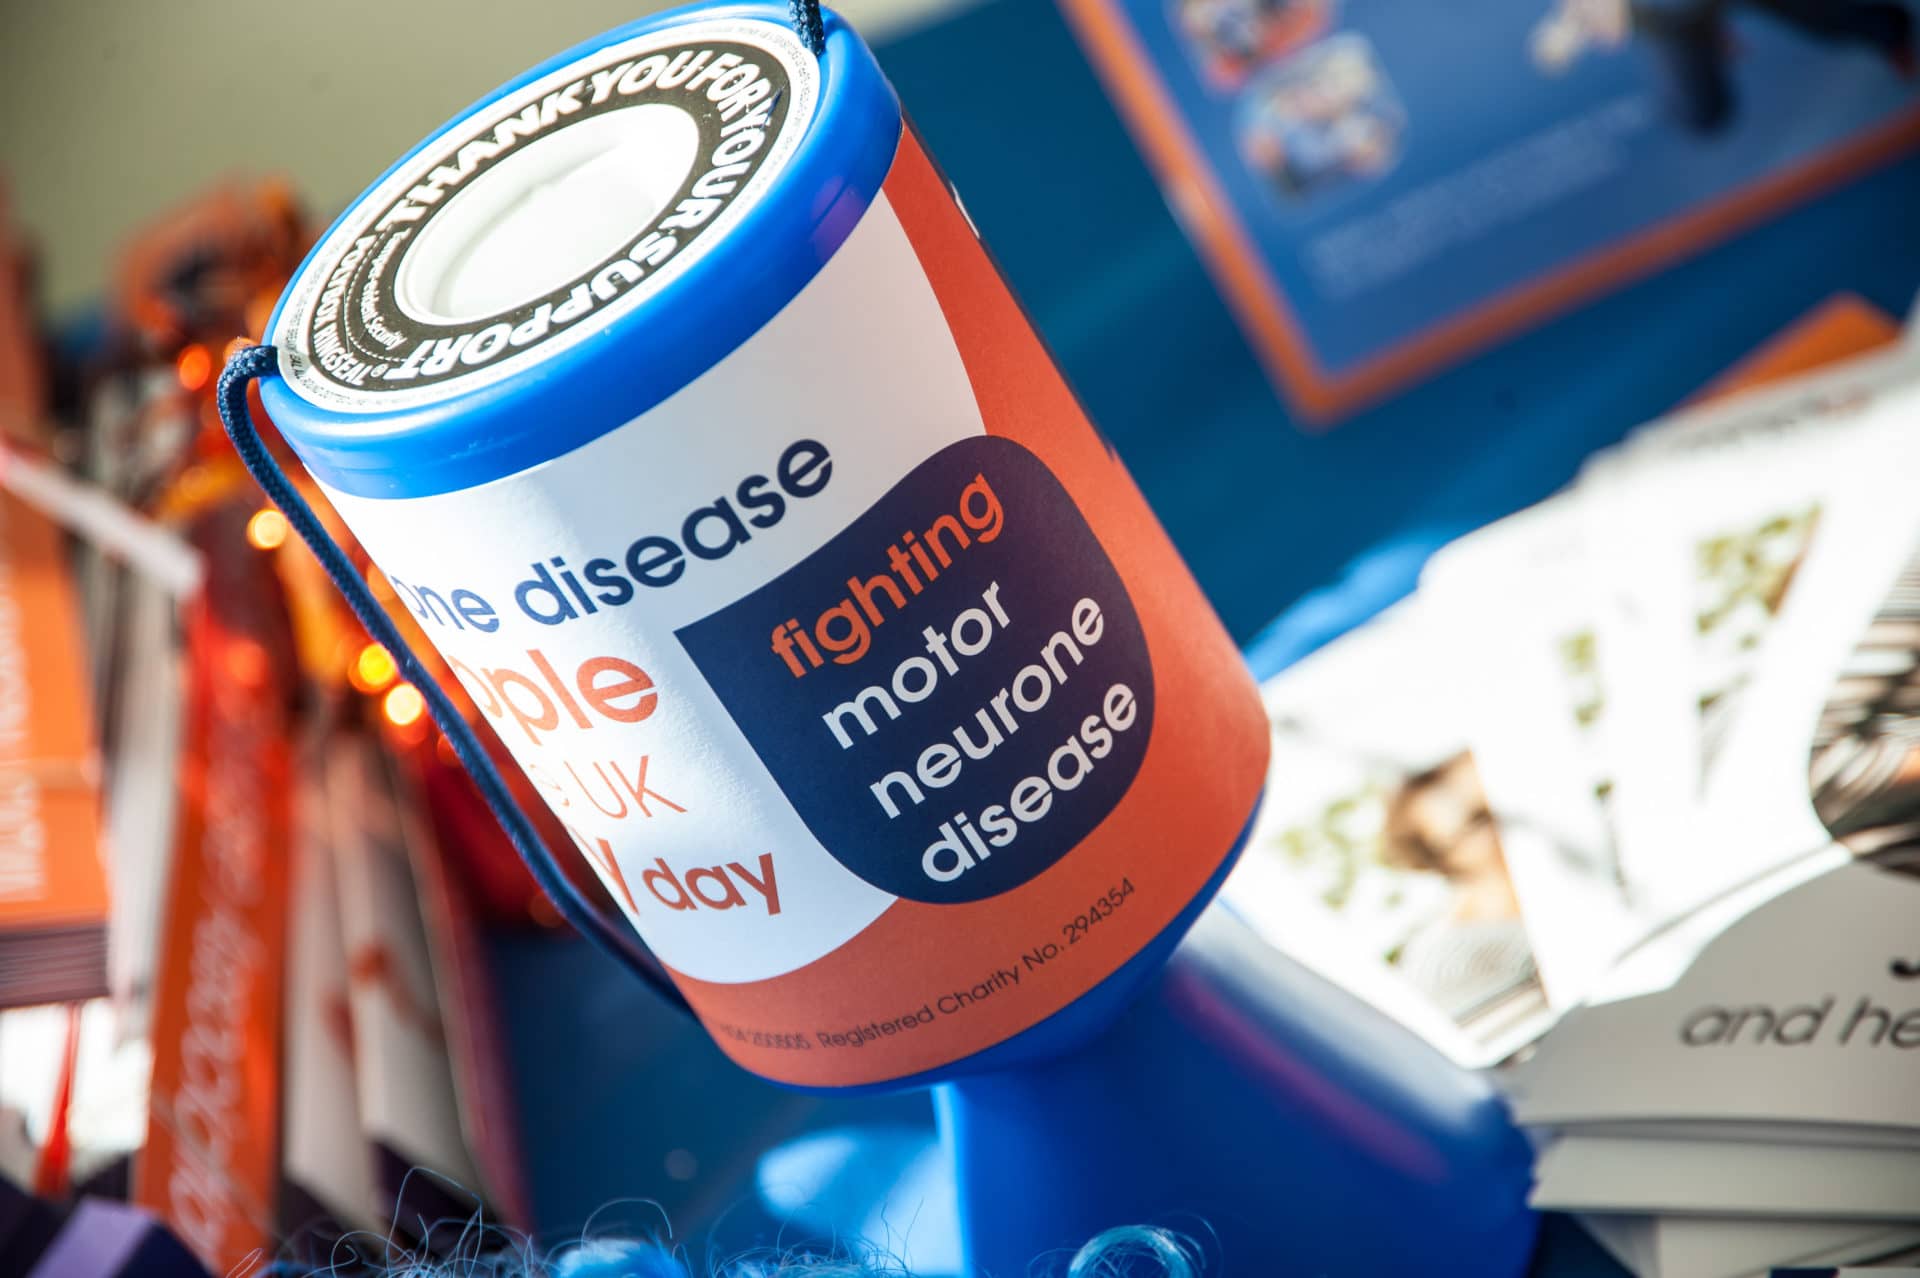 Blue, whit and orange MND Association collection tin sat on a table with MND related literature